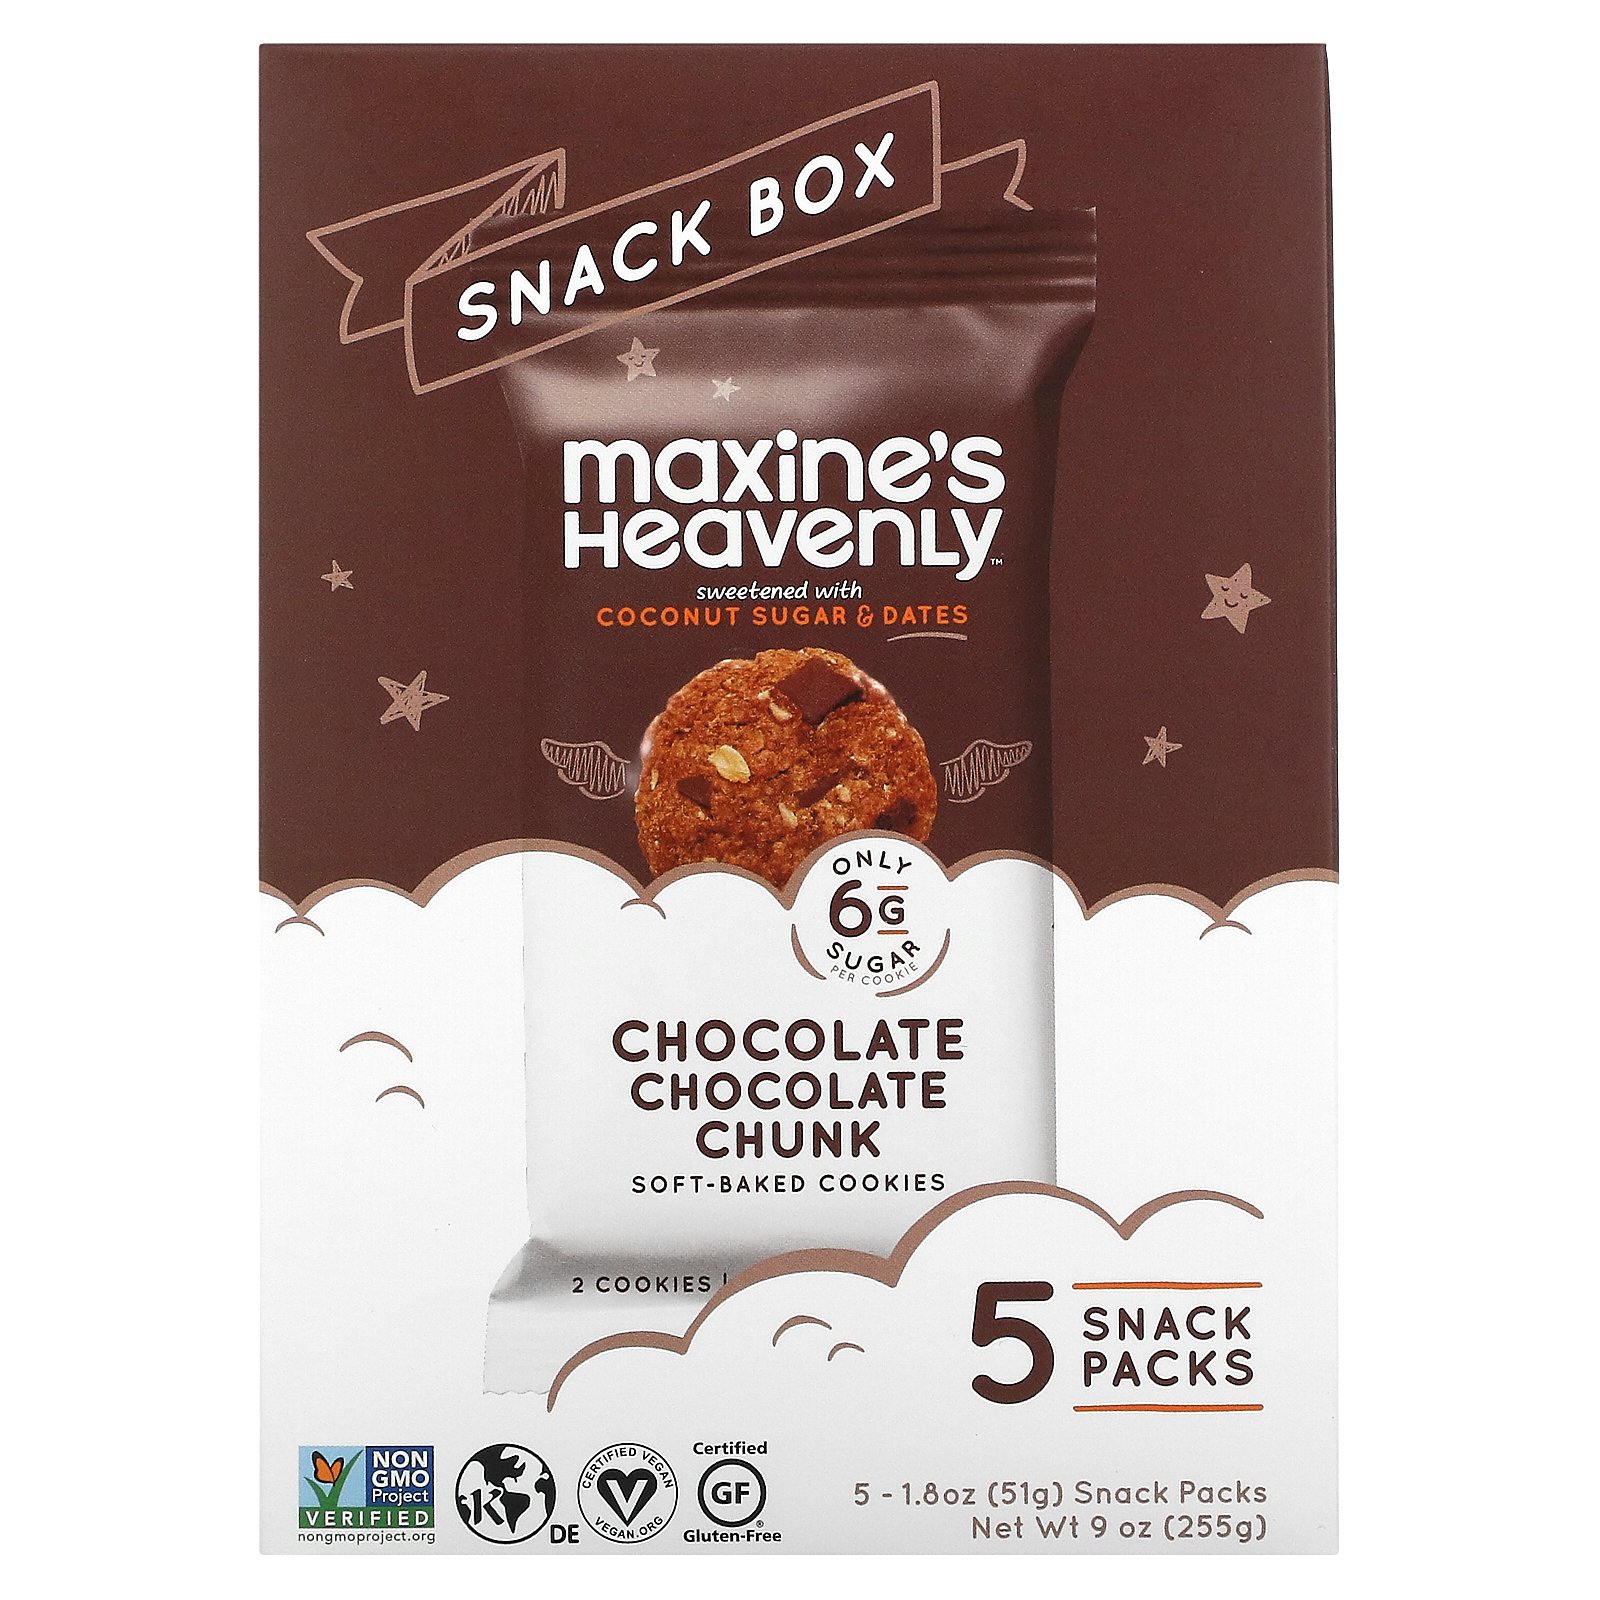 Maxine S Heavenly Snack Box Soft Baked Cookies Chocolate Chocolate Chunk 5 Snack Packs 1 8 Oz 51 G